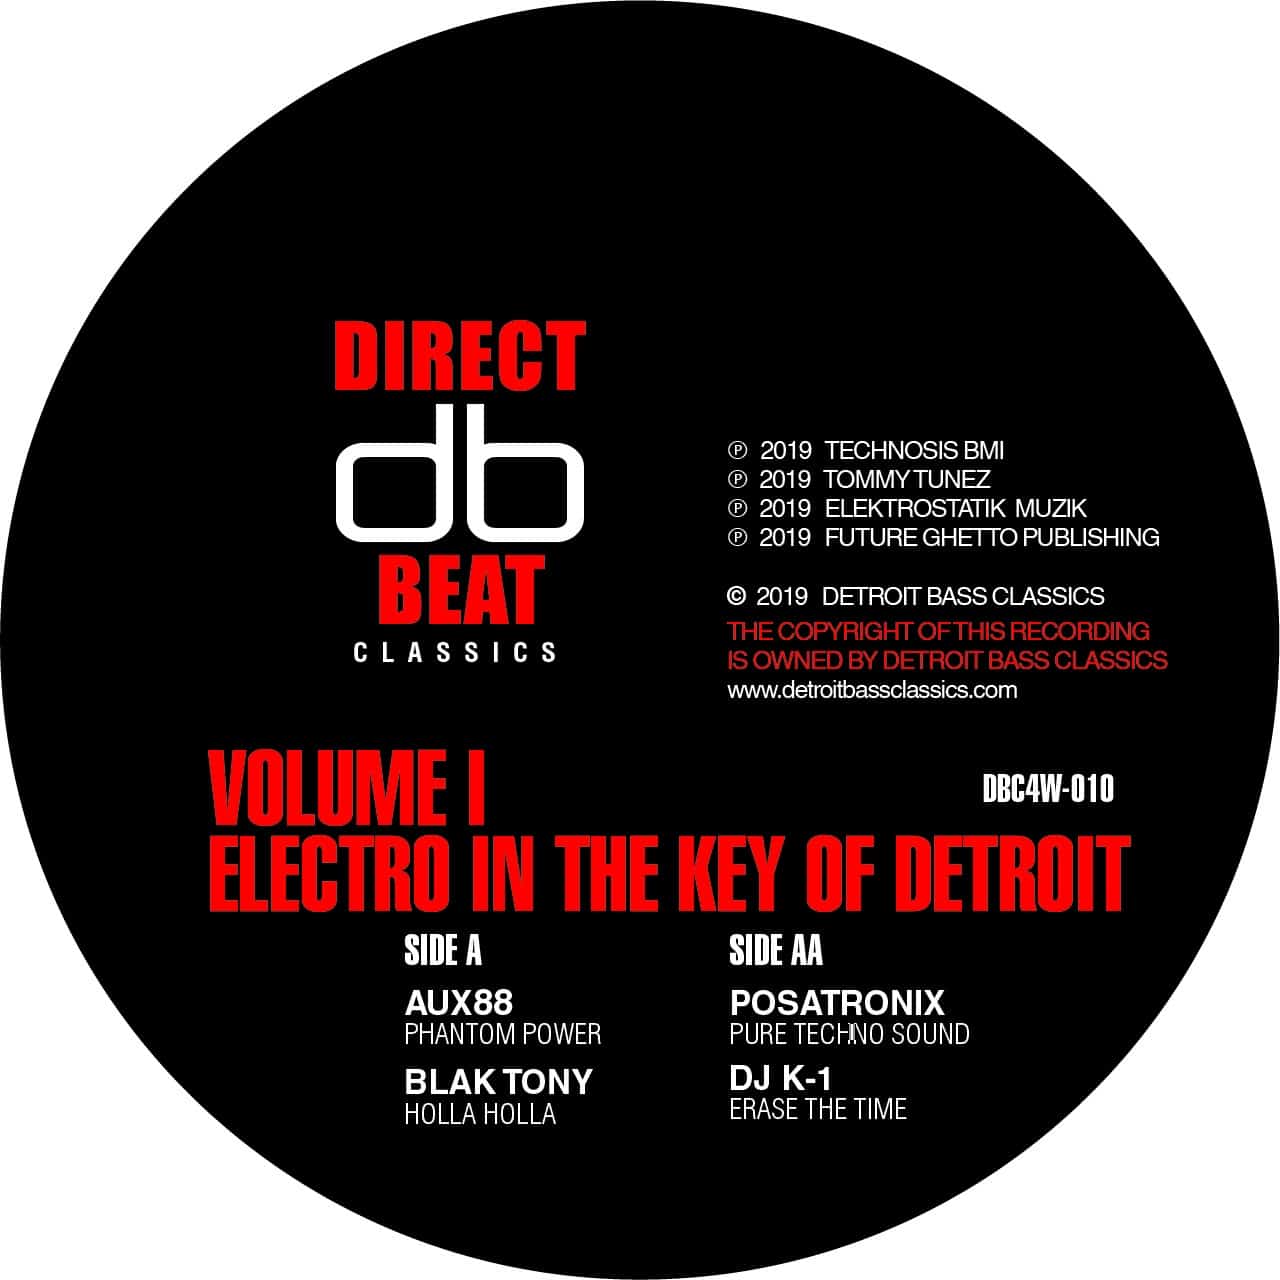 Various - Electro In The Key Of Detroit Vol.1 - DBC4W-010 - DETROIT BASS CLASSICS